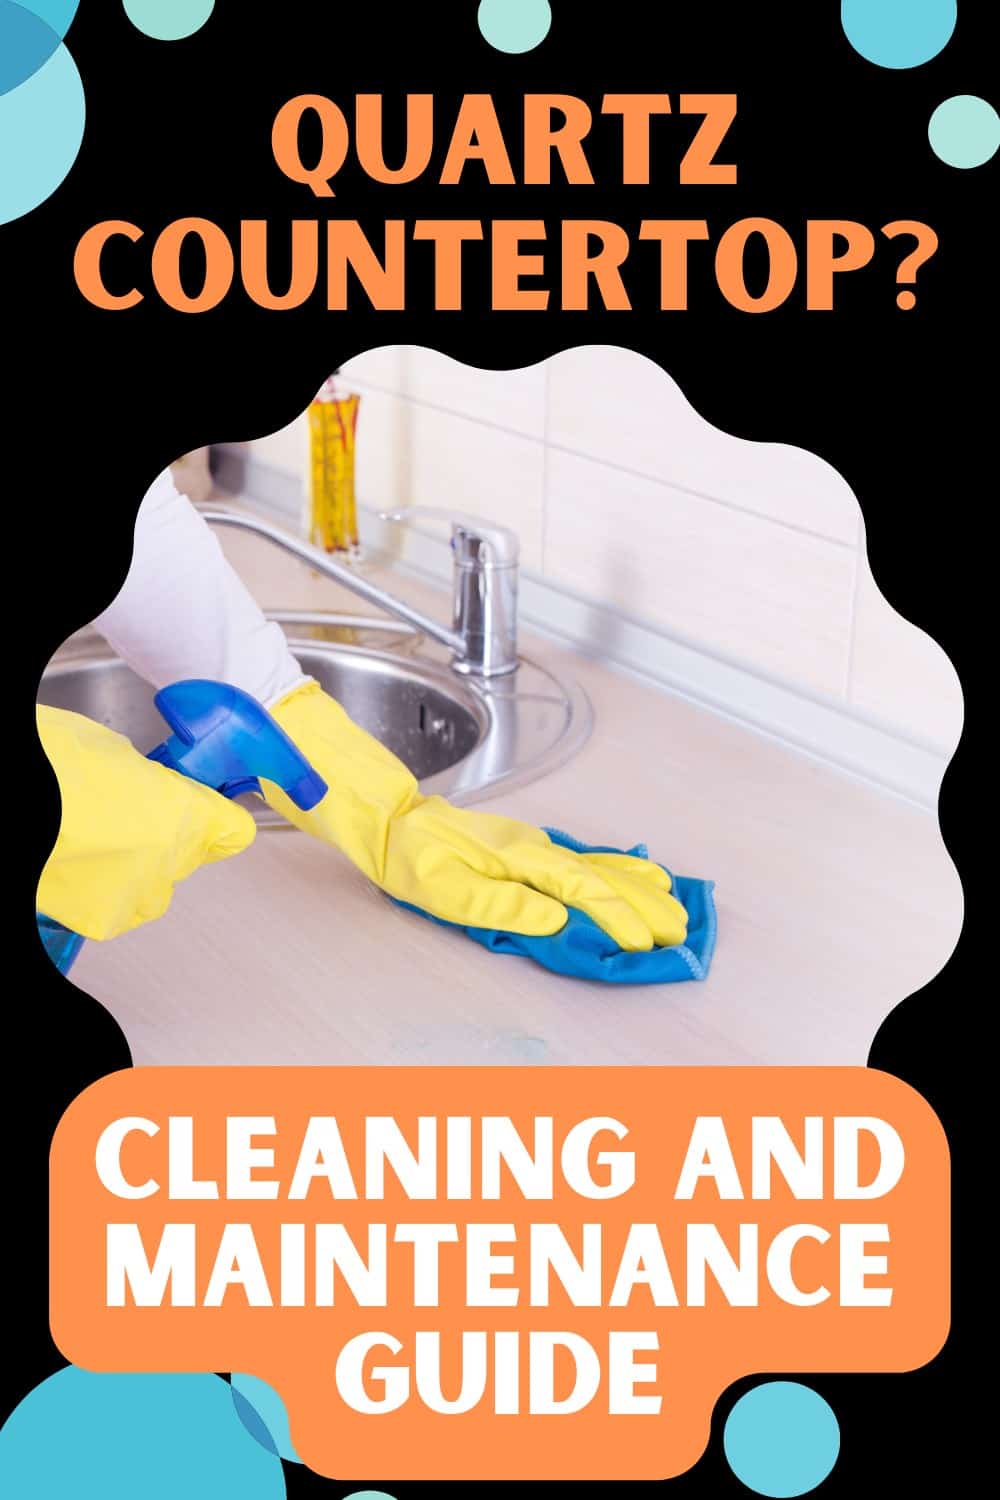 Quartz Countertop Cleaning and Maintenance Guide